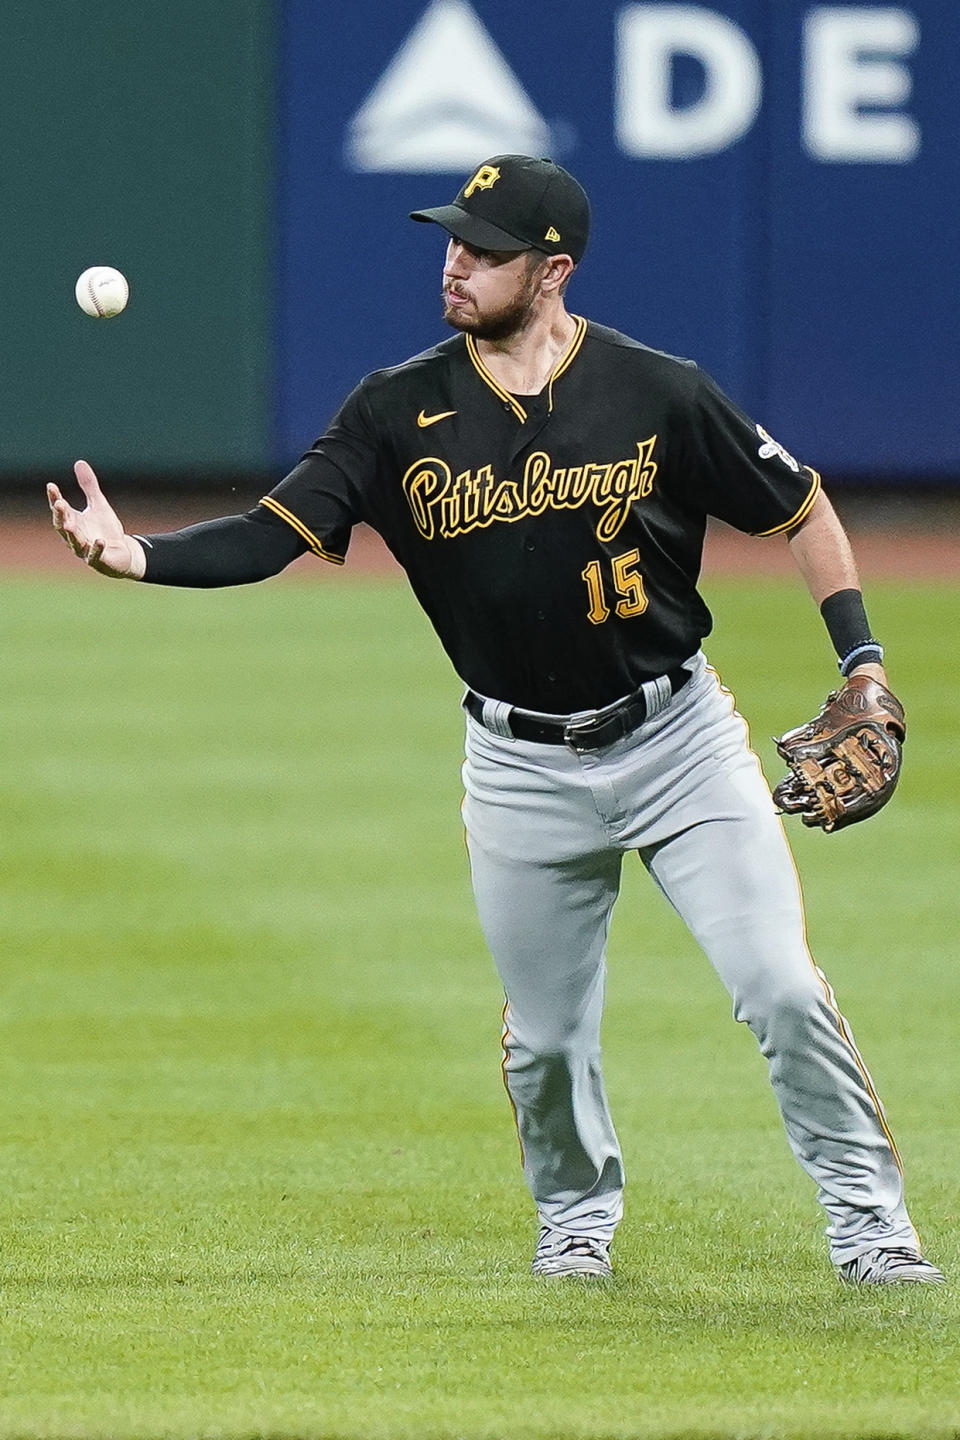 Pittsburgh Pirates shortstop JT Riddle fields the ball before throwing out Cincinnati Reds' Freddy Galvis at first base during the sixth inning of a baseball game in Cincinnati, Tuesday, Sept. 15, 2020. (AP Photo/Bryan Woolston)